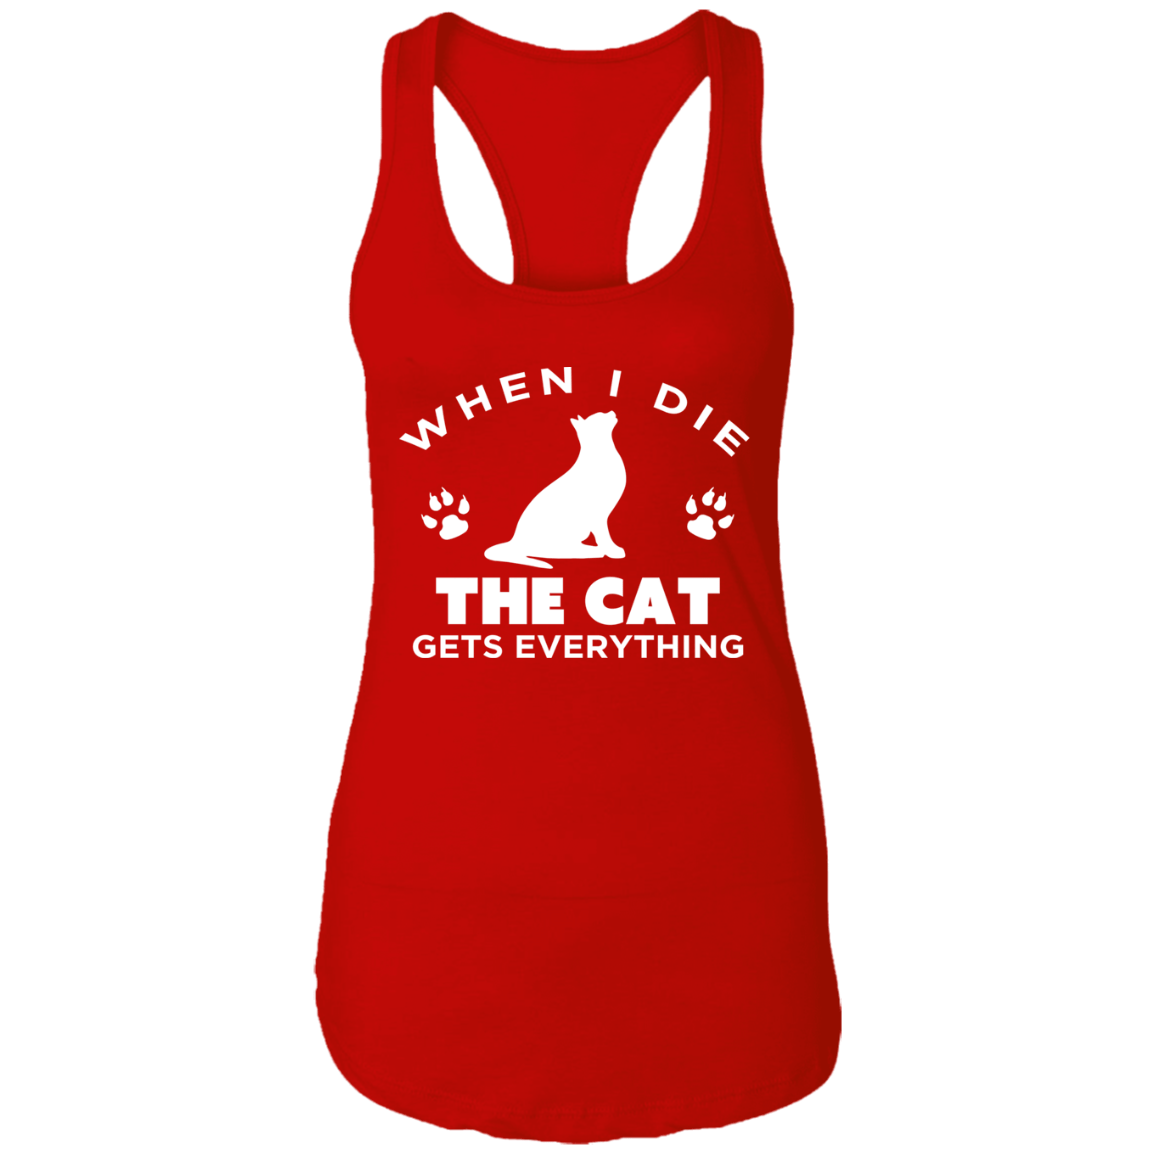 When I Die The Cat Gets Everything - Ladies Racer Back Tank.